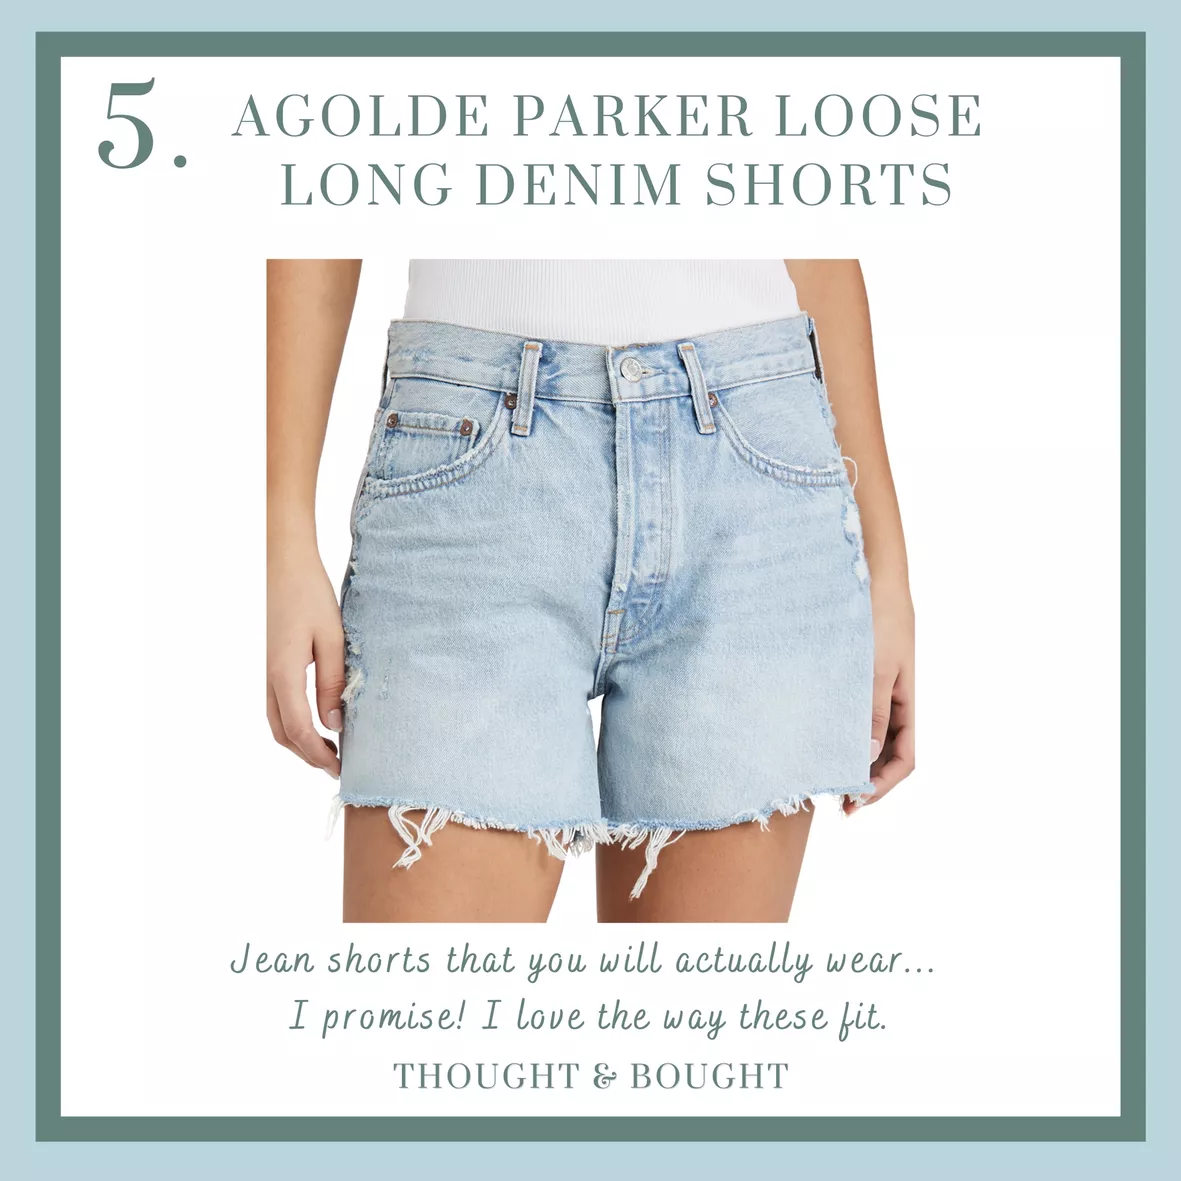 Parker Long Shorts curated on LTK